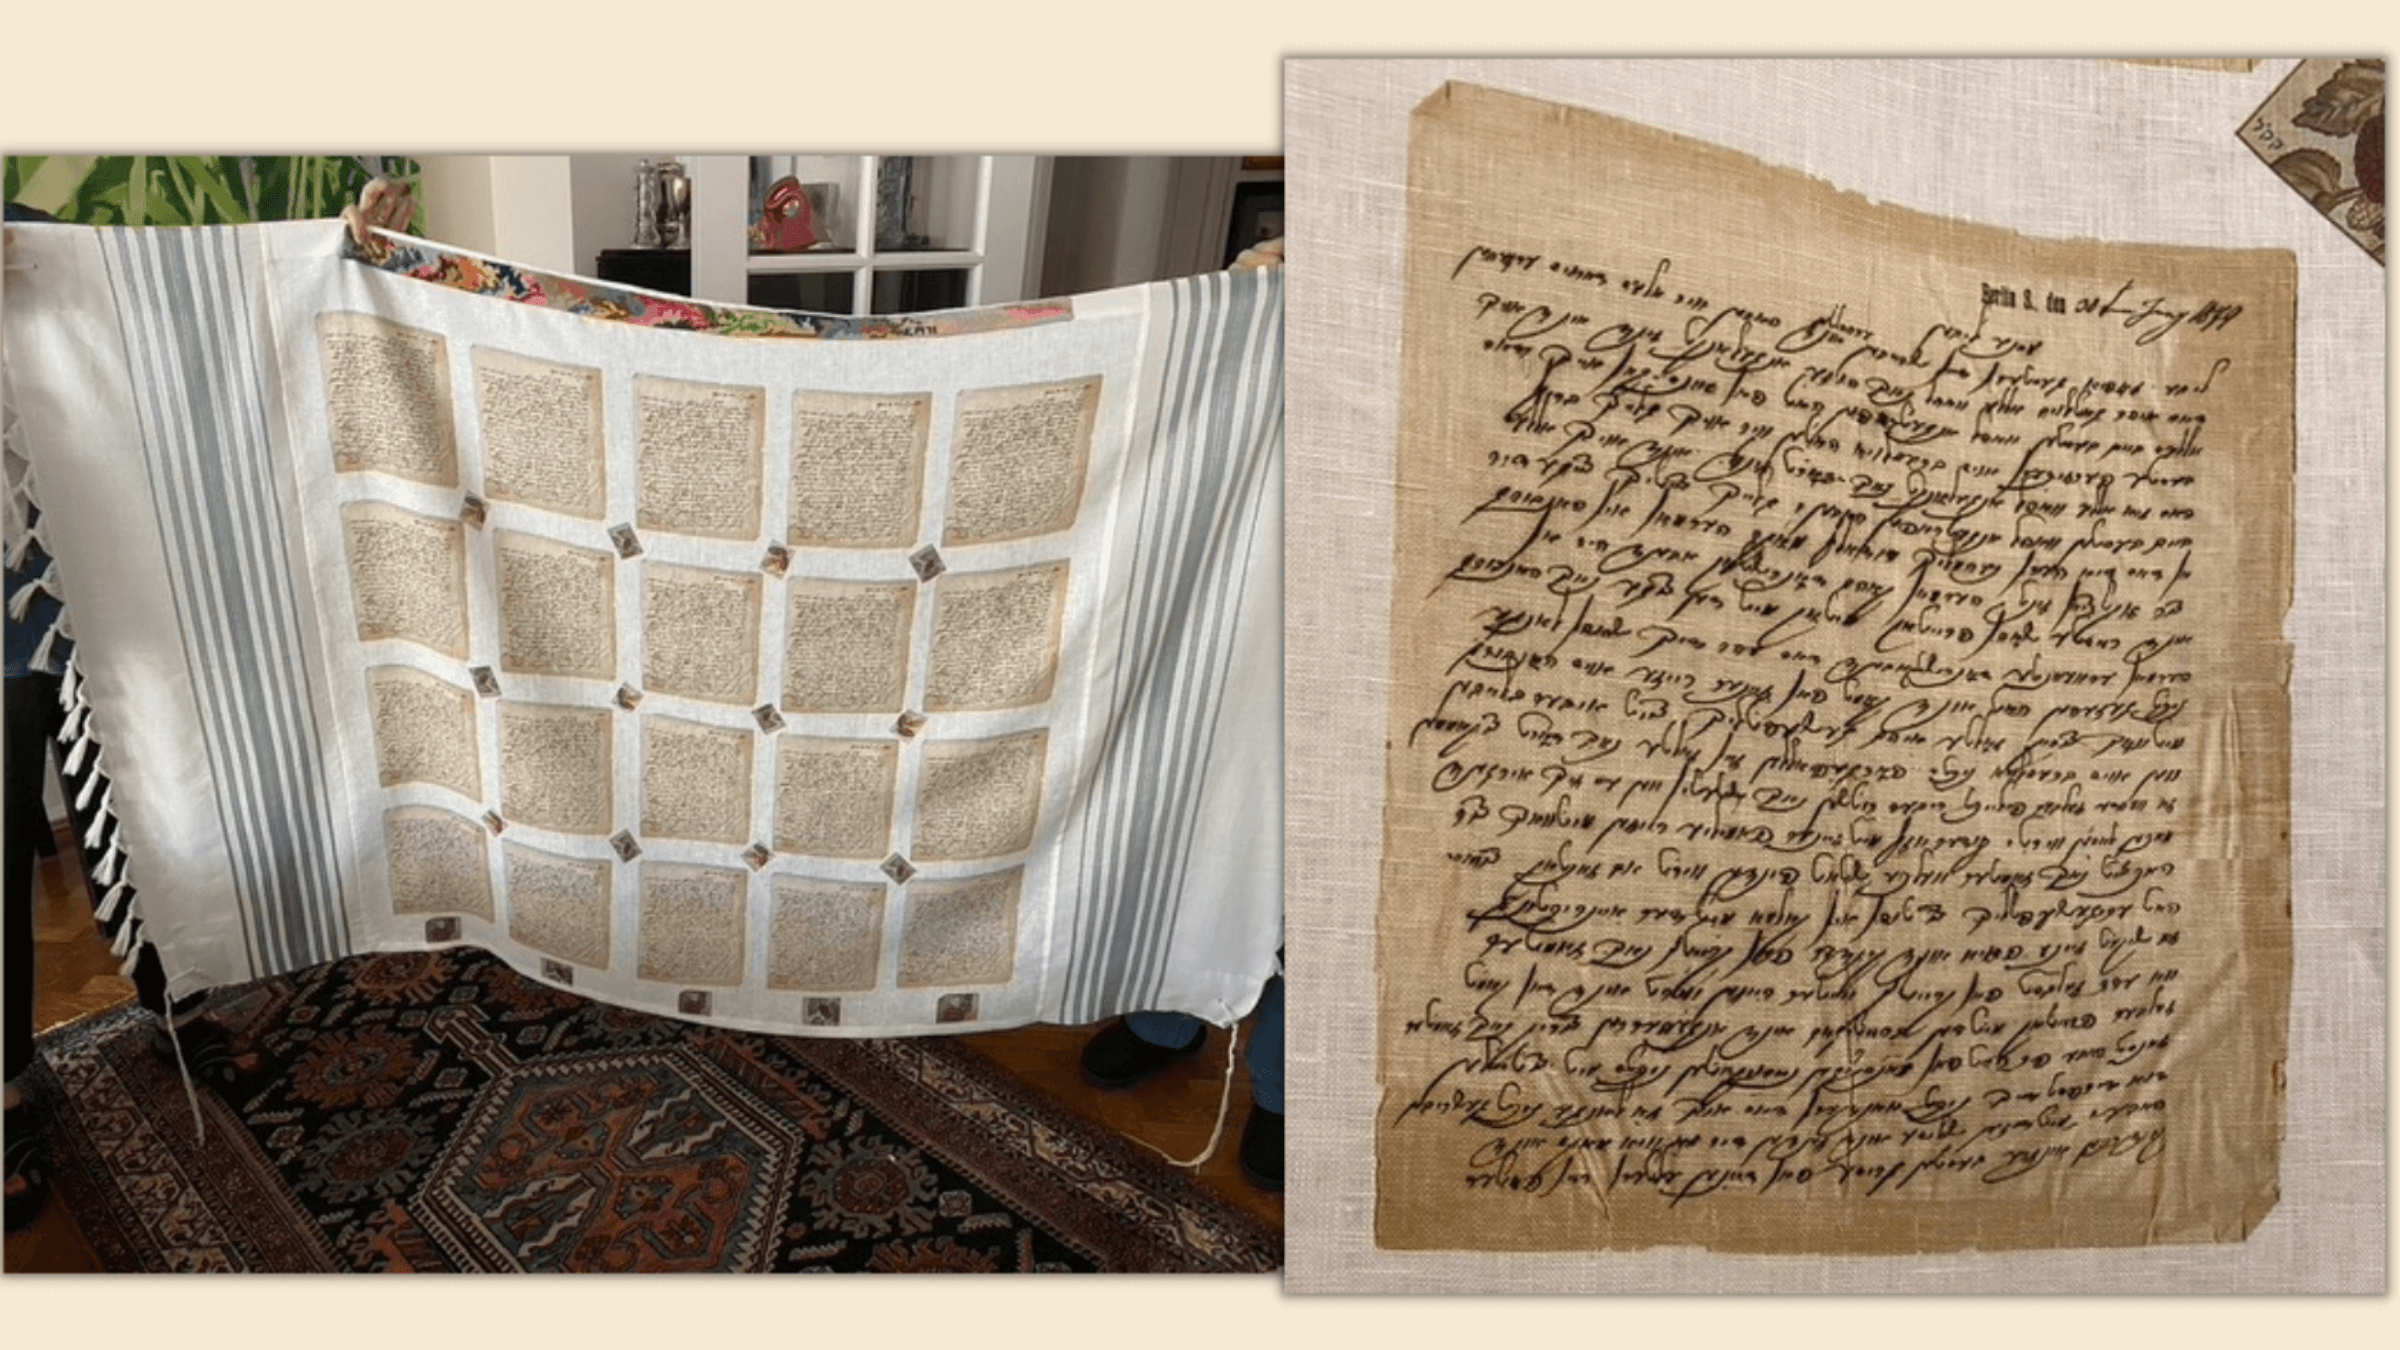 
The tallit, and the original 1879 letter from Simon Freudenheim to his daughter Sophie.